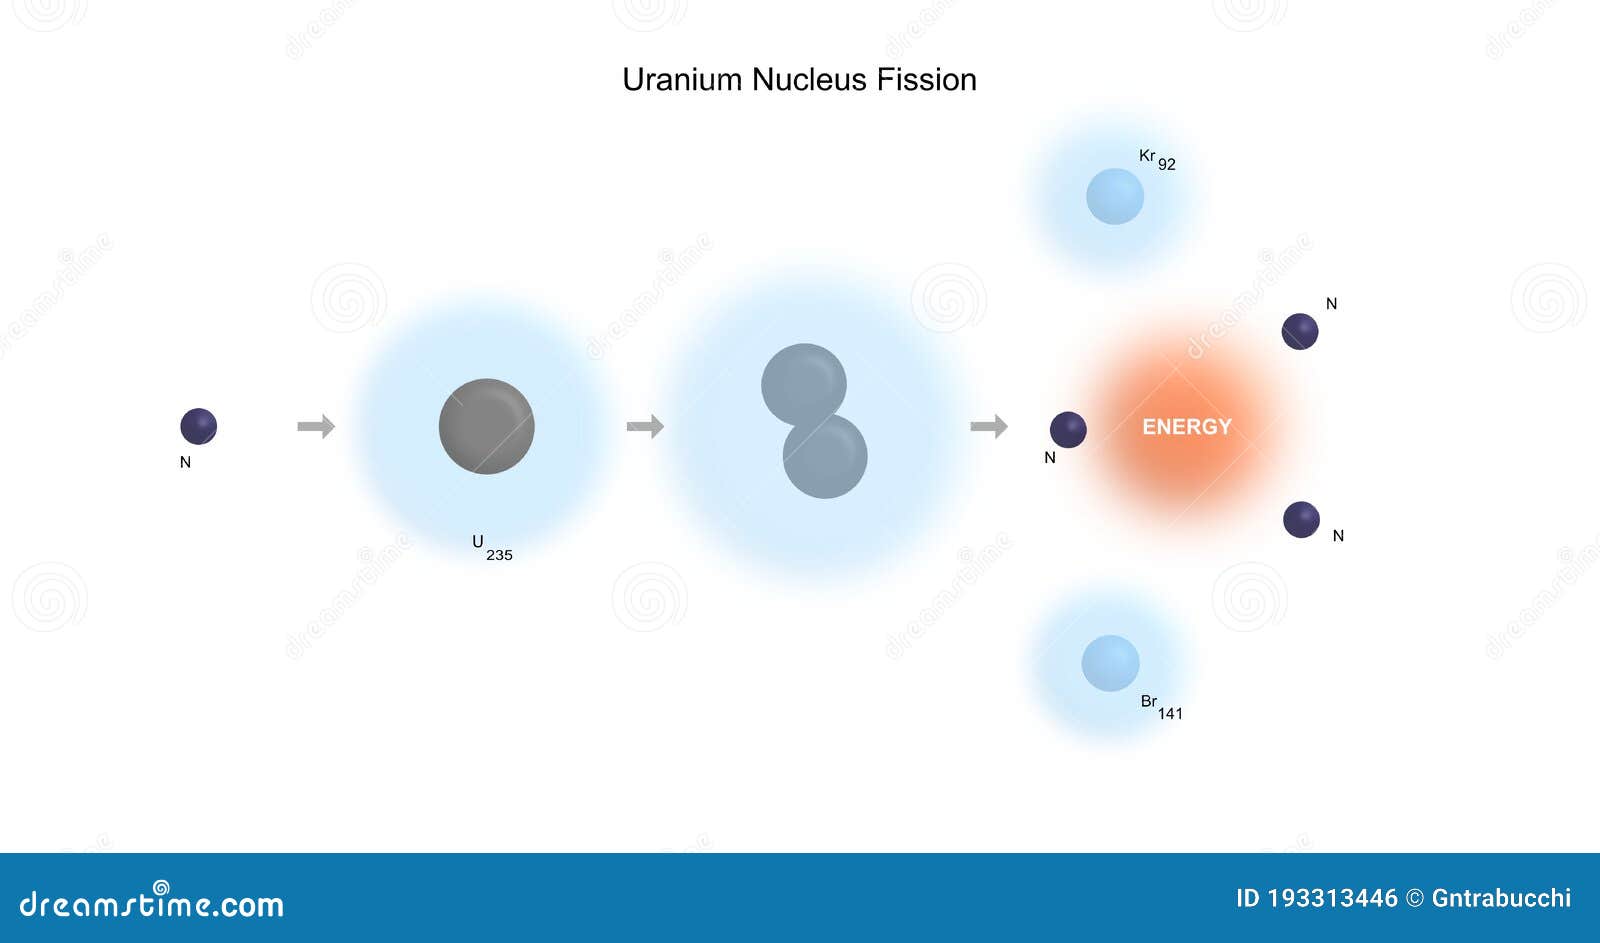 Реакция распада урана 235. Nuclear Fission Reaction 235 Uranium. Fission products Uranium-235 nuclear Fission Reaction. Ядерная реакция урана 235. Lisa Meitner picture of Fission of Uranium Nucleus.